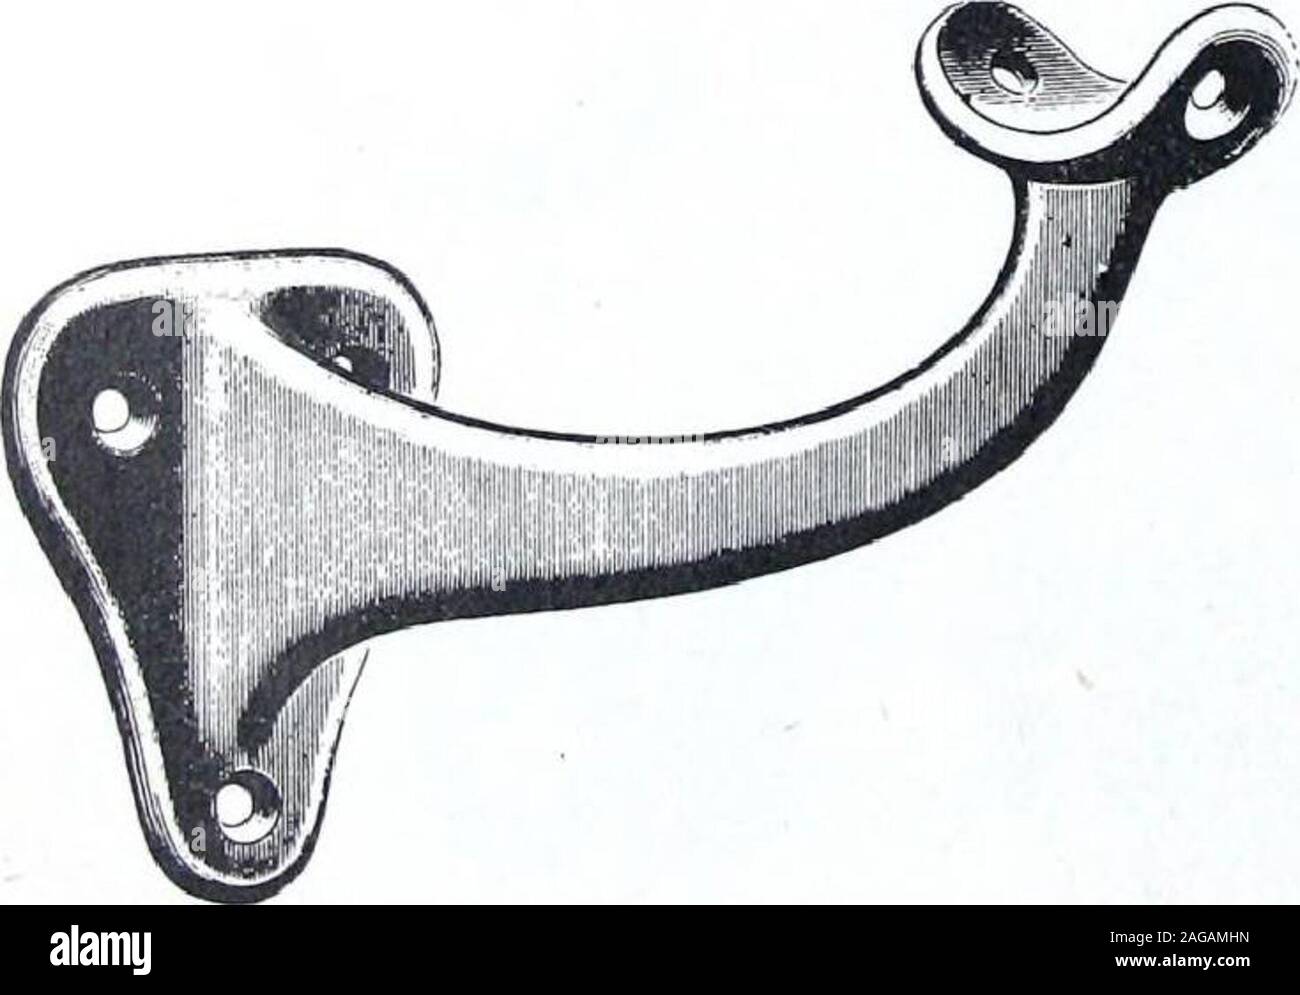 https://c8.alamy.com/comp/2AGAMHN/illustrated-catalogue-of-locks-and-builders-hardware-4-in-round-bar-cr-no-358no-558-no-658-wardrobe-hooks-cast-iron-water-tumbled-japanned-finishcast-iron-water-tumbled-amber-bronze-finishcast-iron-water-tumbled-plated-finishes-packed-one-dozen-in-a-box-hat-pins-no-357cast-iron-water-tumbled-japanned-finishno-557cast-iron-water-tumbled-amber-bronze-finishno-657cast-iron-water-tumbled-plated-finishes-packed-one-dozen-in-a-box-pole-brackets-for-ik-in-round-bar-projection-from-underside-of-base-to-centre-of-bar-4gt-in-no-3557cast-iron-water-tumbled-2AGAMHN.jpg